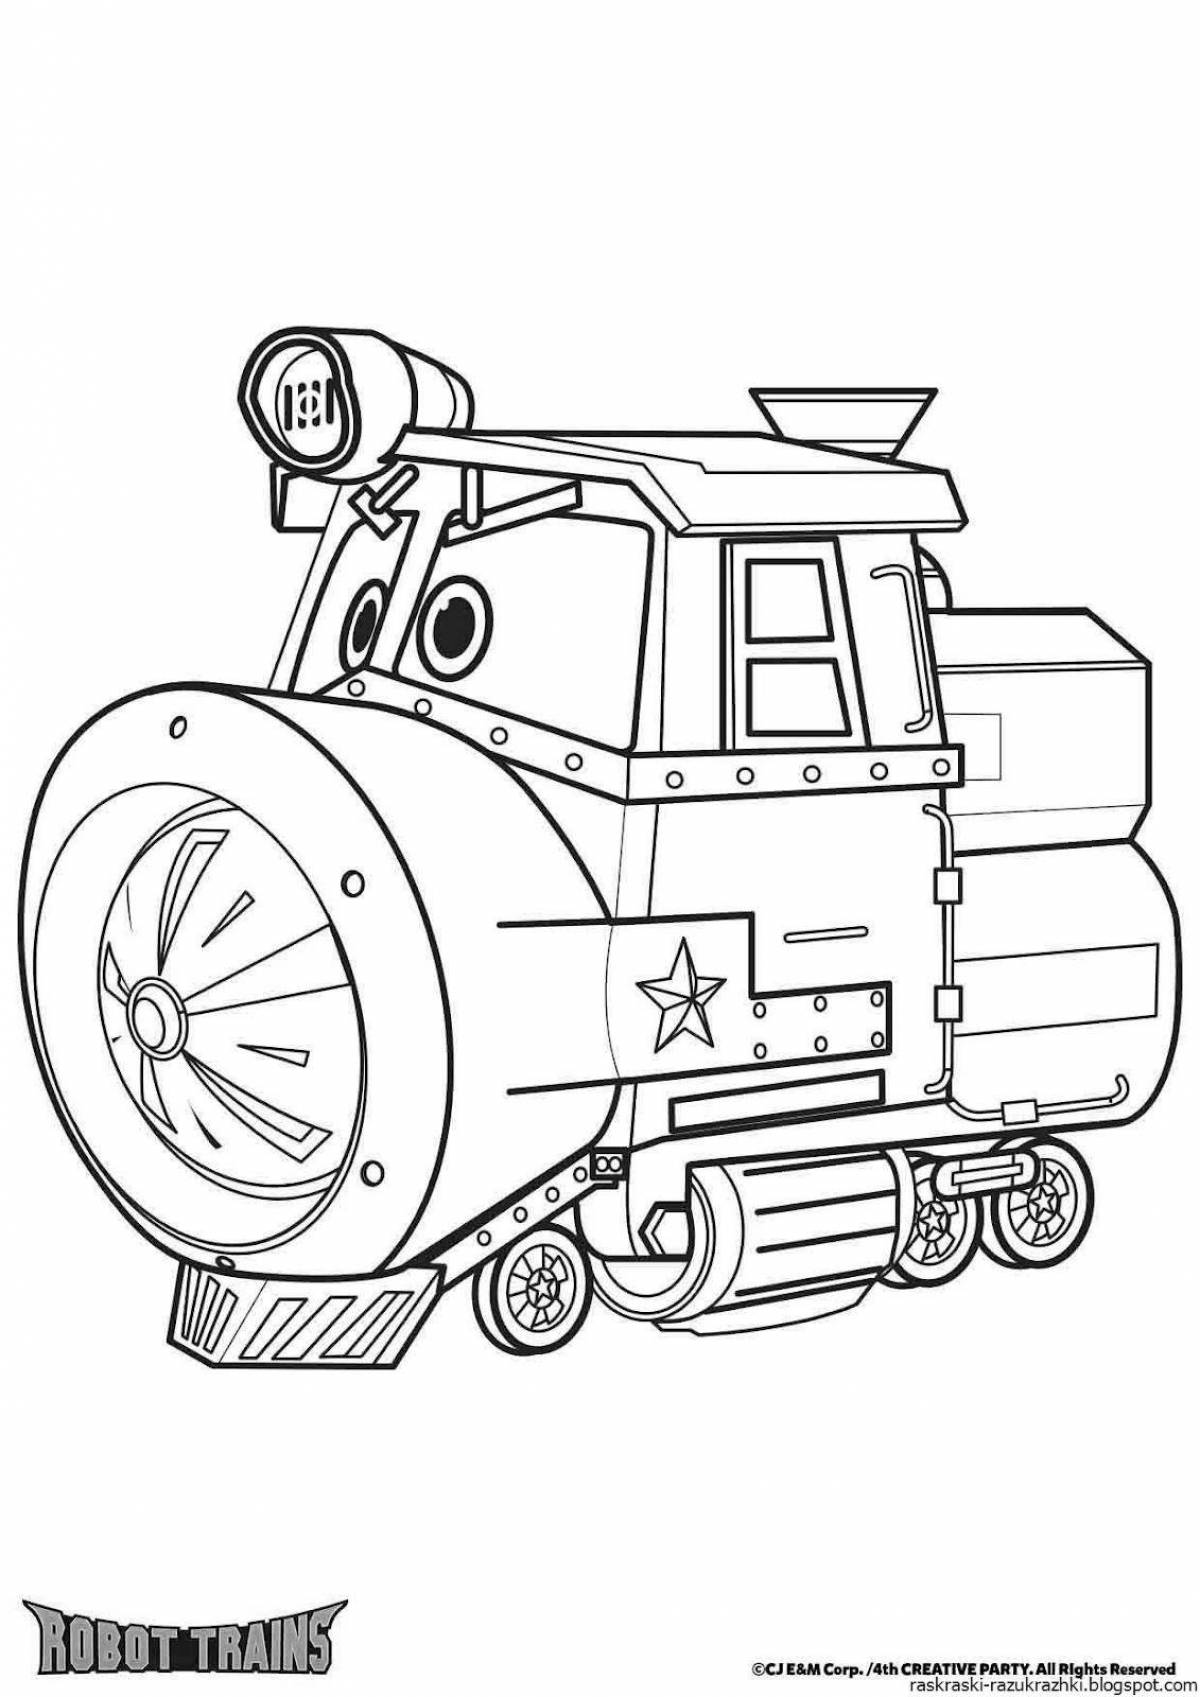 Exciting coloring pages of duke train robots